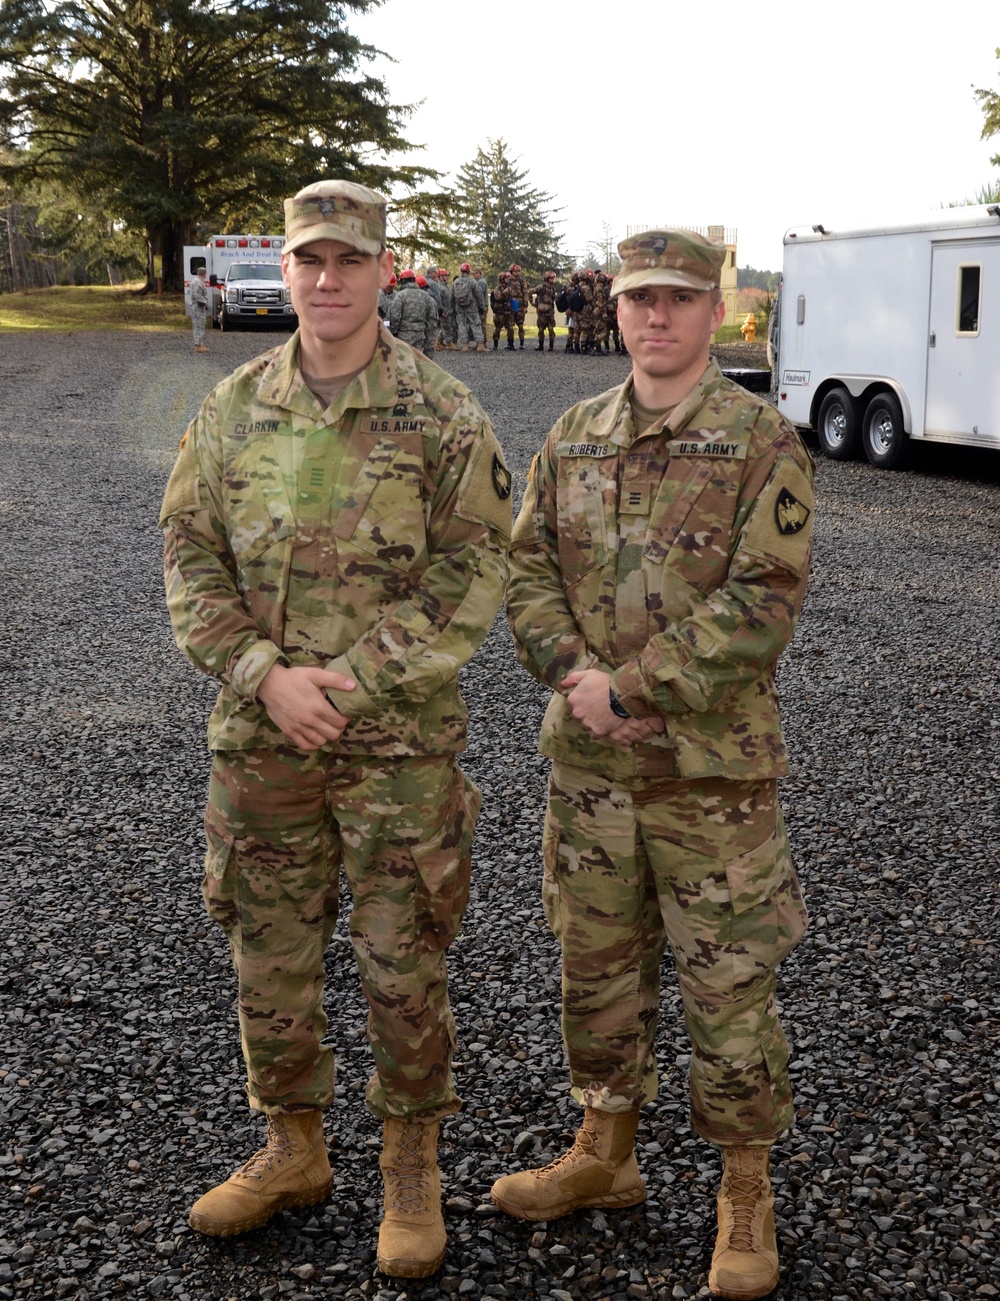 West Point cadets experience cultural lessons first hand